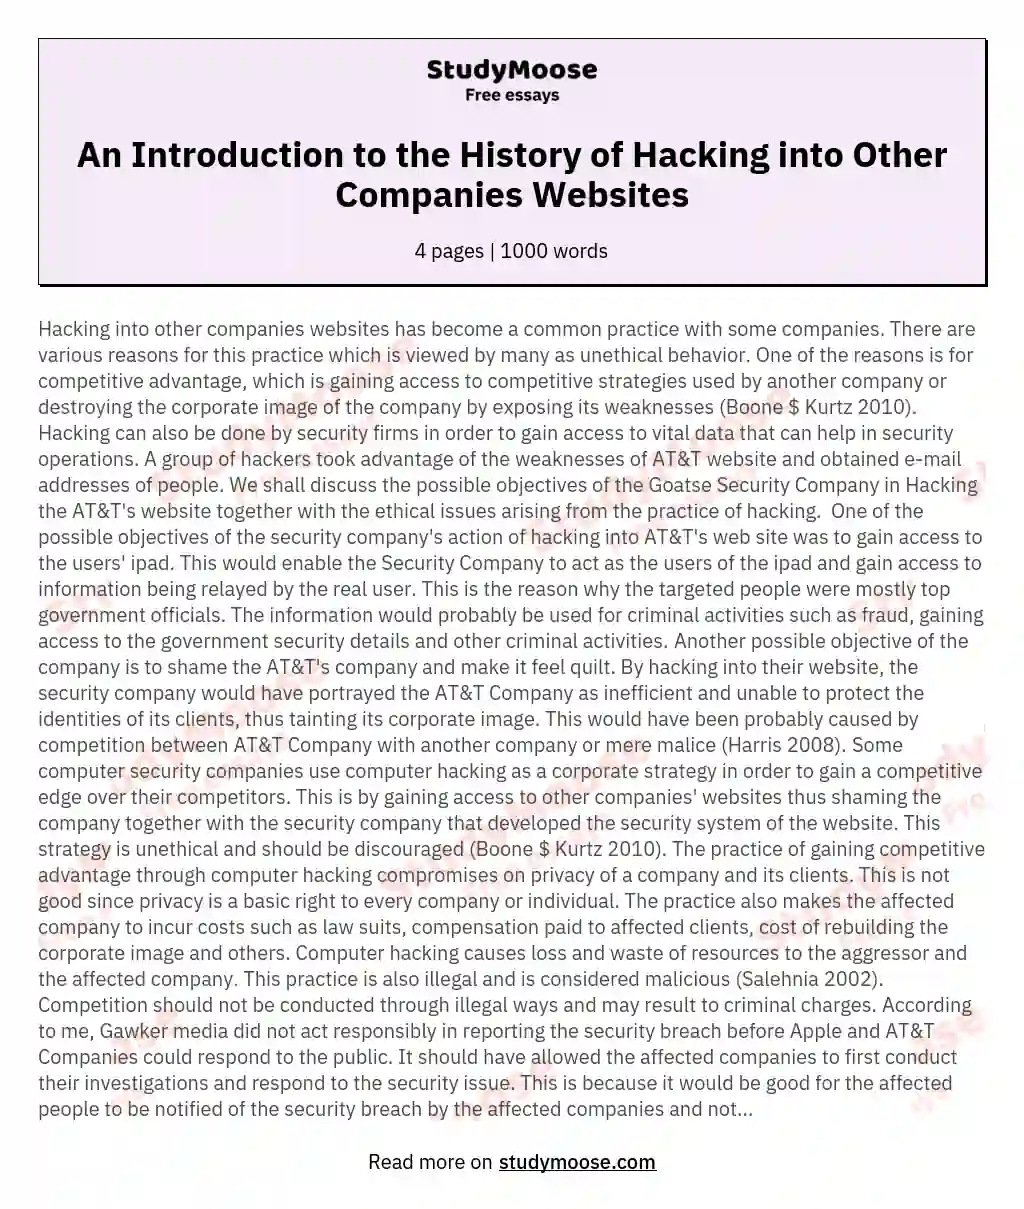 An Introduction to the History of Hacking into Other Companies Websites essay